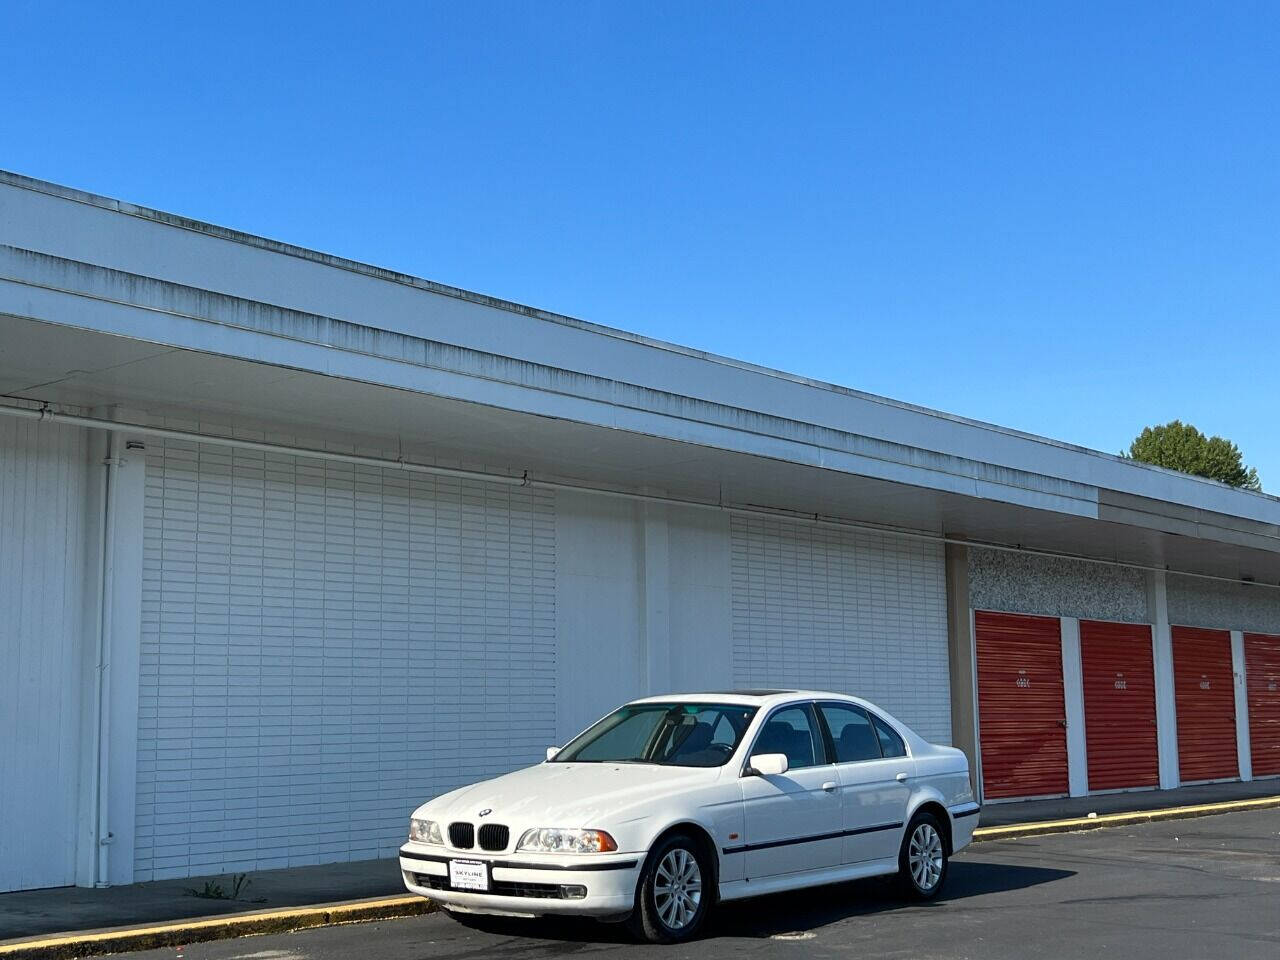 BMW SERIE 5 2000-bmw-m5-e39 Used - the parking